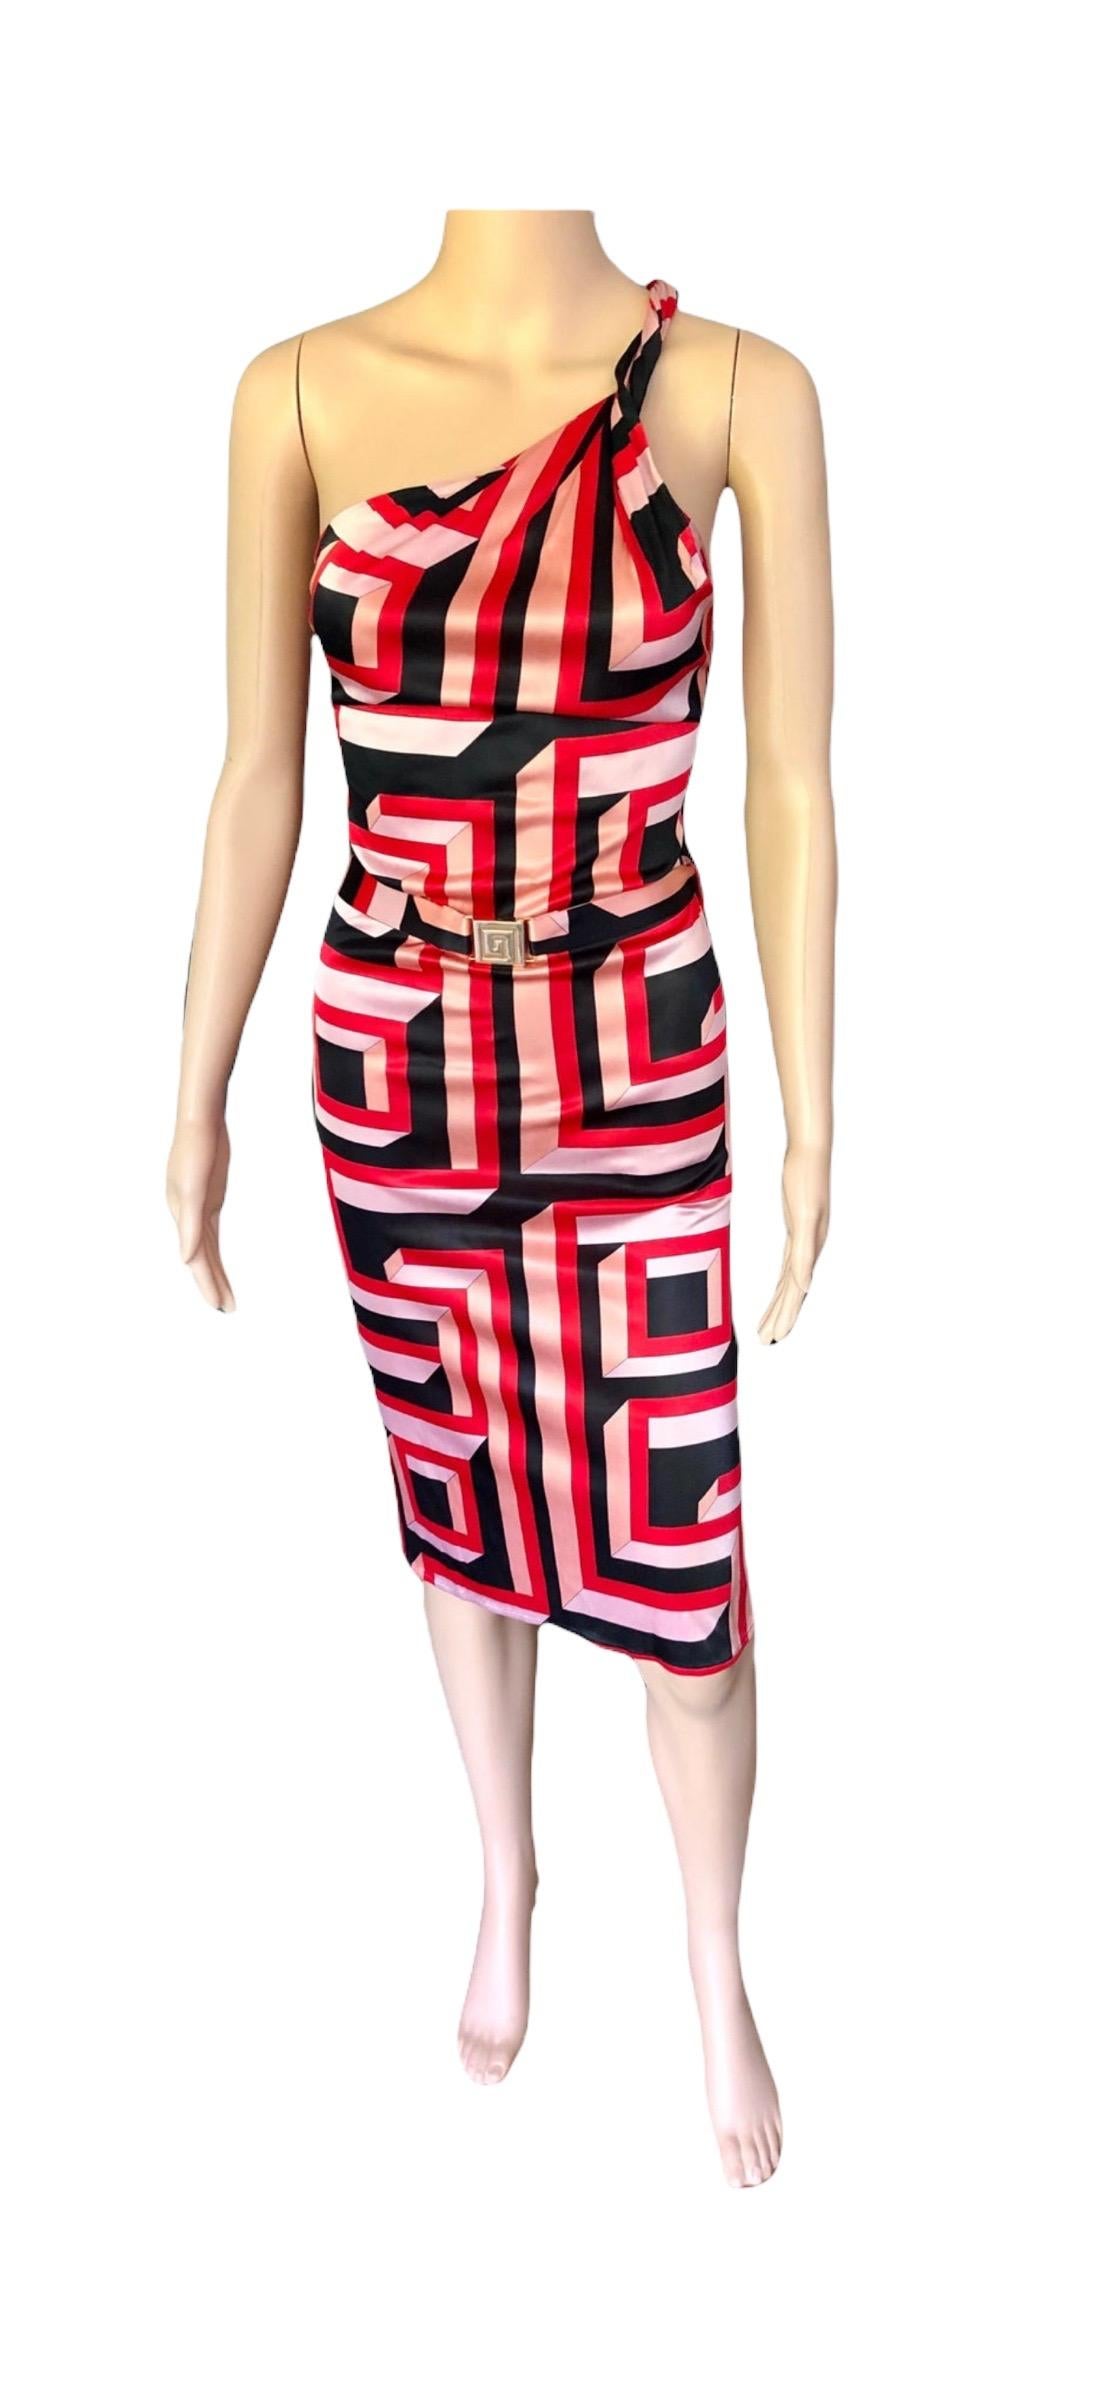 Gianni Versace S/S 2001 Vintage Geometric Print Belted Open Back Dress For Sale 7